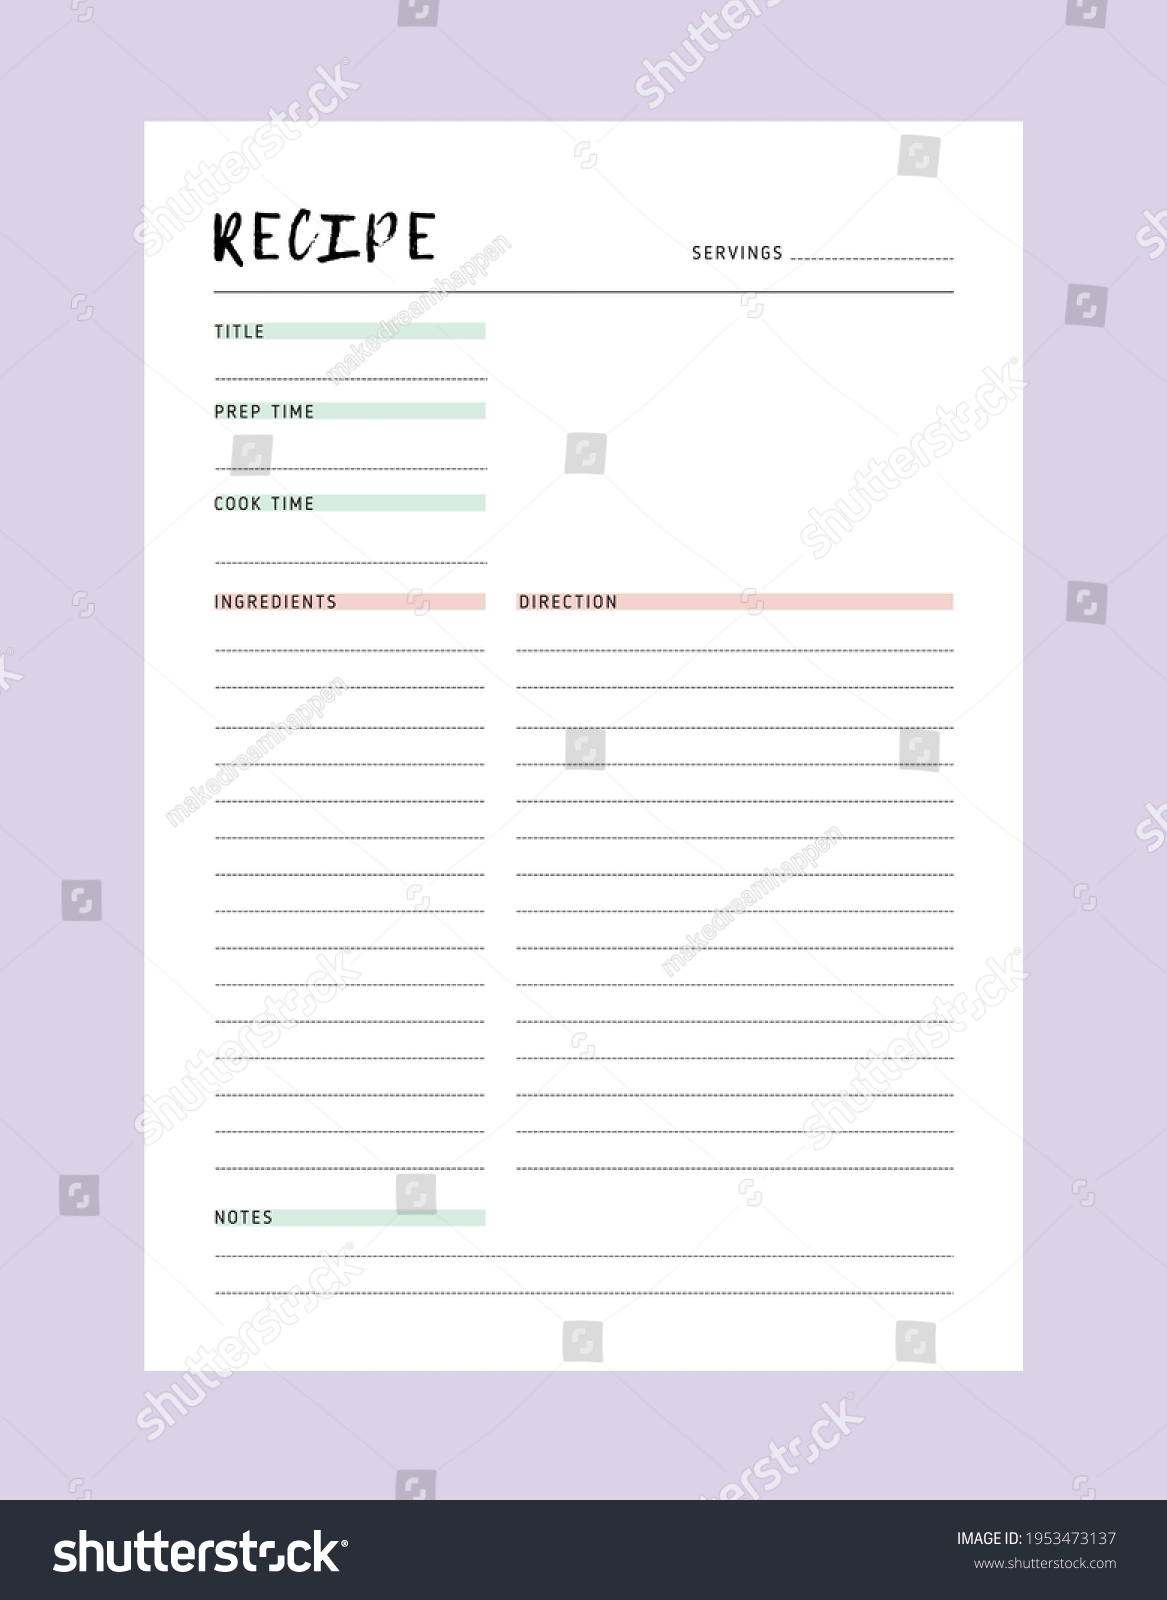 Recipe Card Meal Planner Printable Template Stock Vector (Royalty Free ...